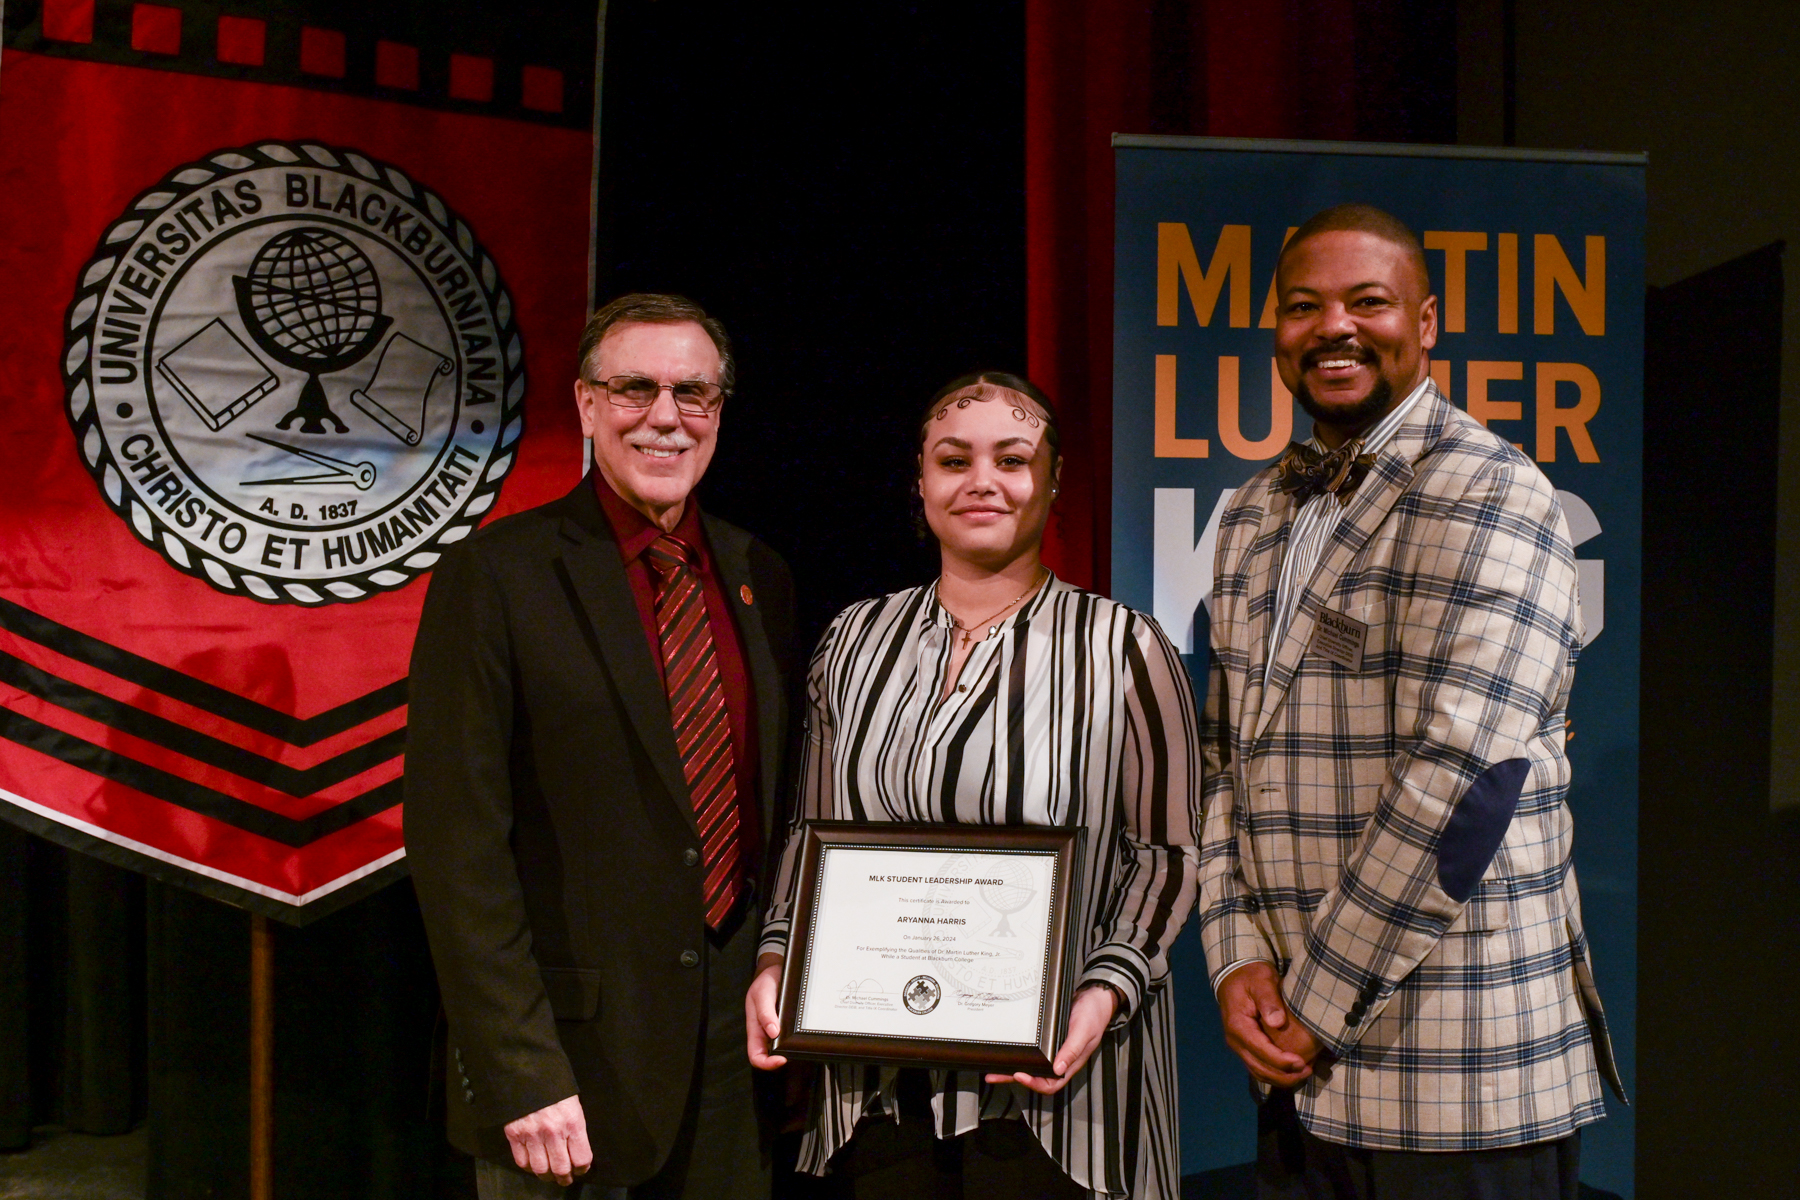 Senior Aryanna Harris (center) pictured with Blackburn College President Gregory J. Meyer (left) and Chief Diversity Officer and Executive Director of Diversity, Equity, Inclusion and Belonging Dr. Michael Cummings (right) on stage following the annual MLK Convocation at Blackburn College.